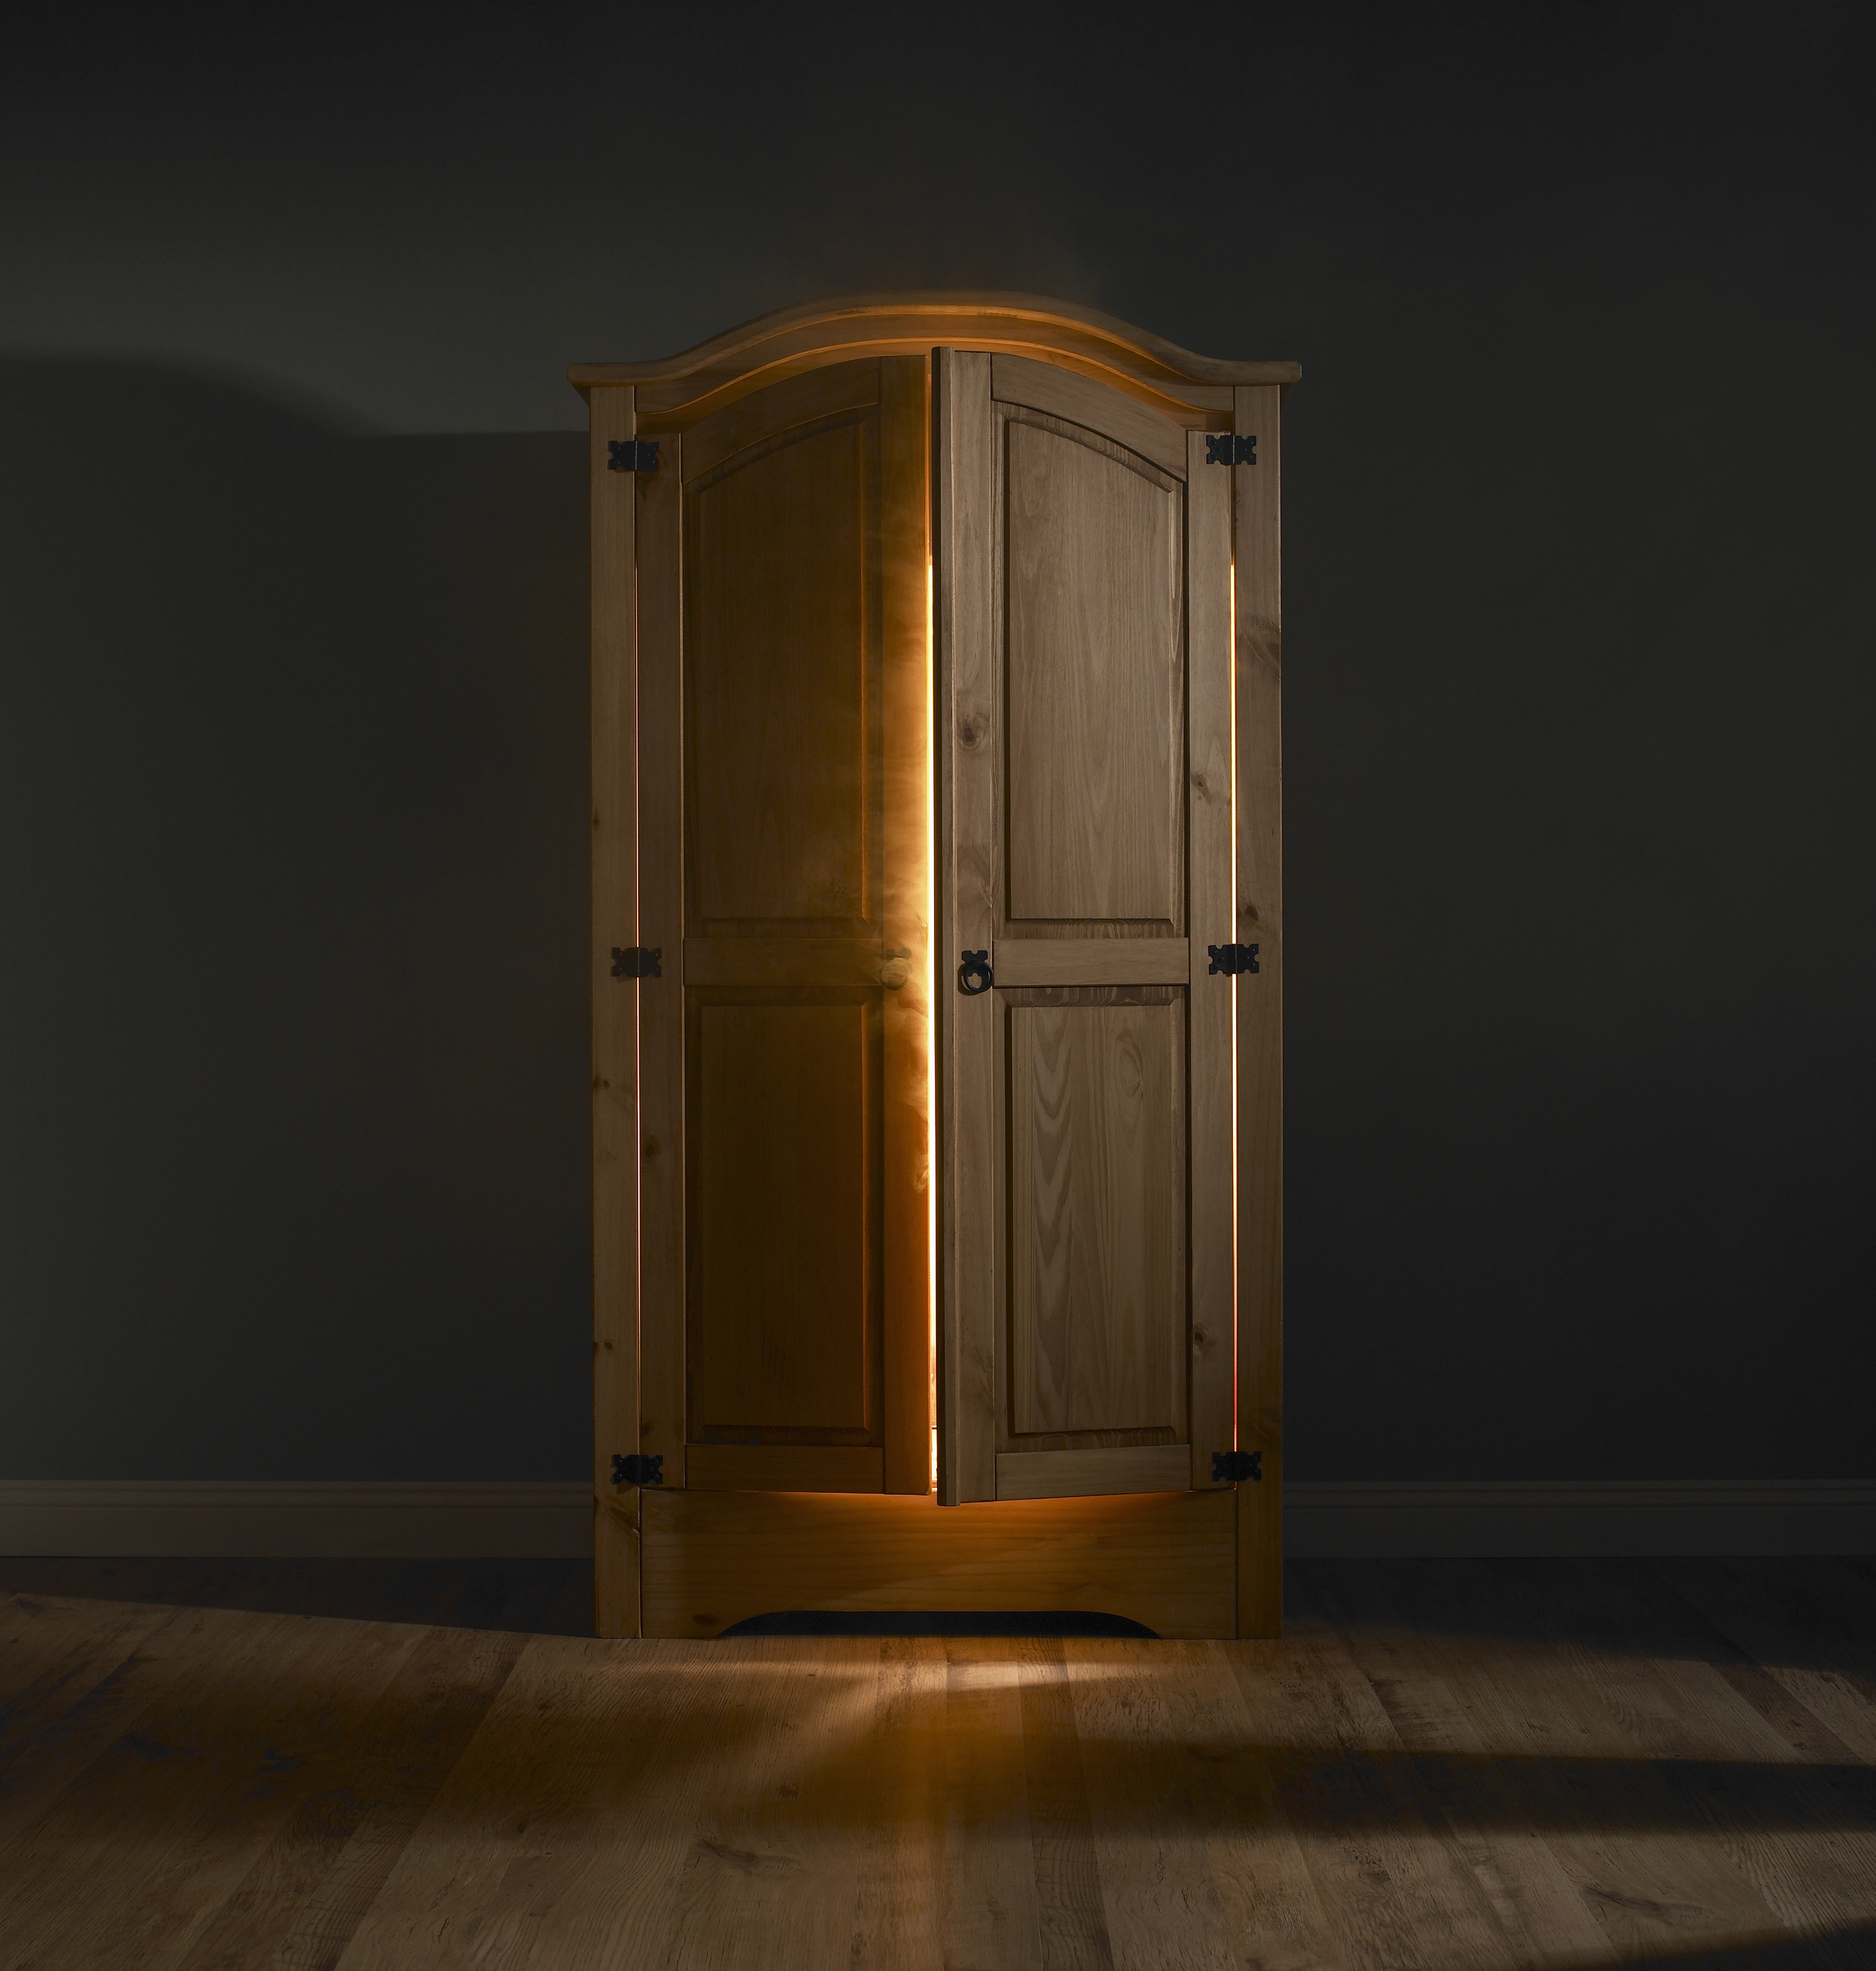 Light shining out of wardrobe door | Source: Getty Images